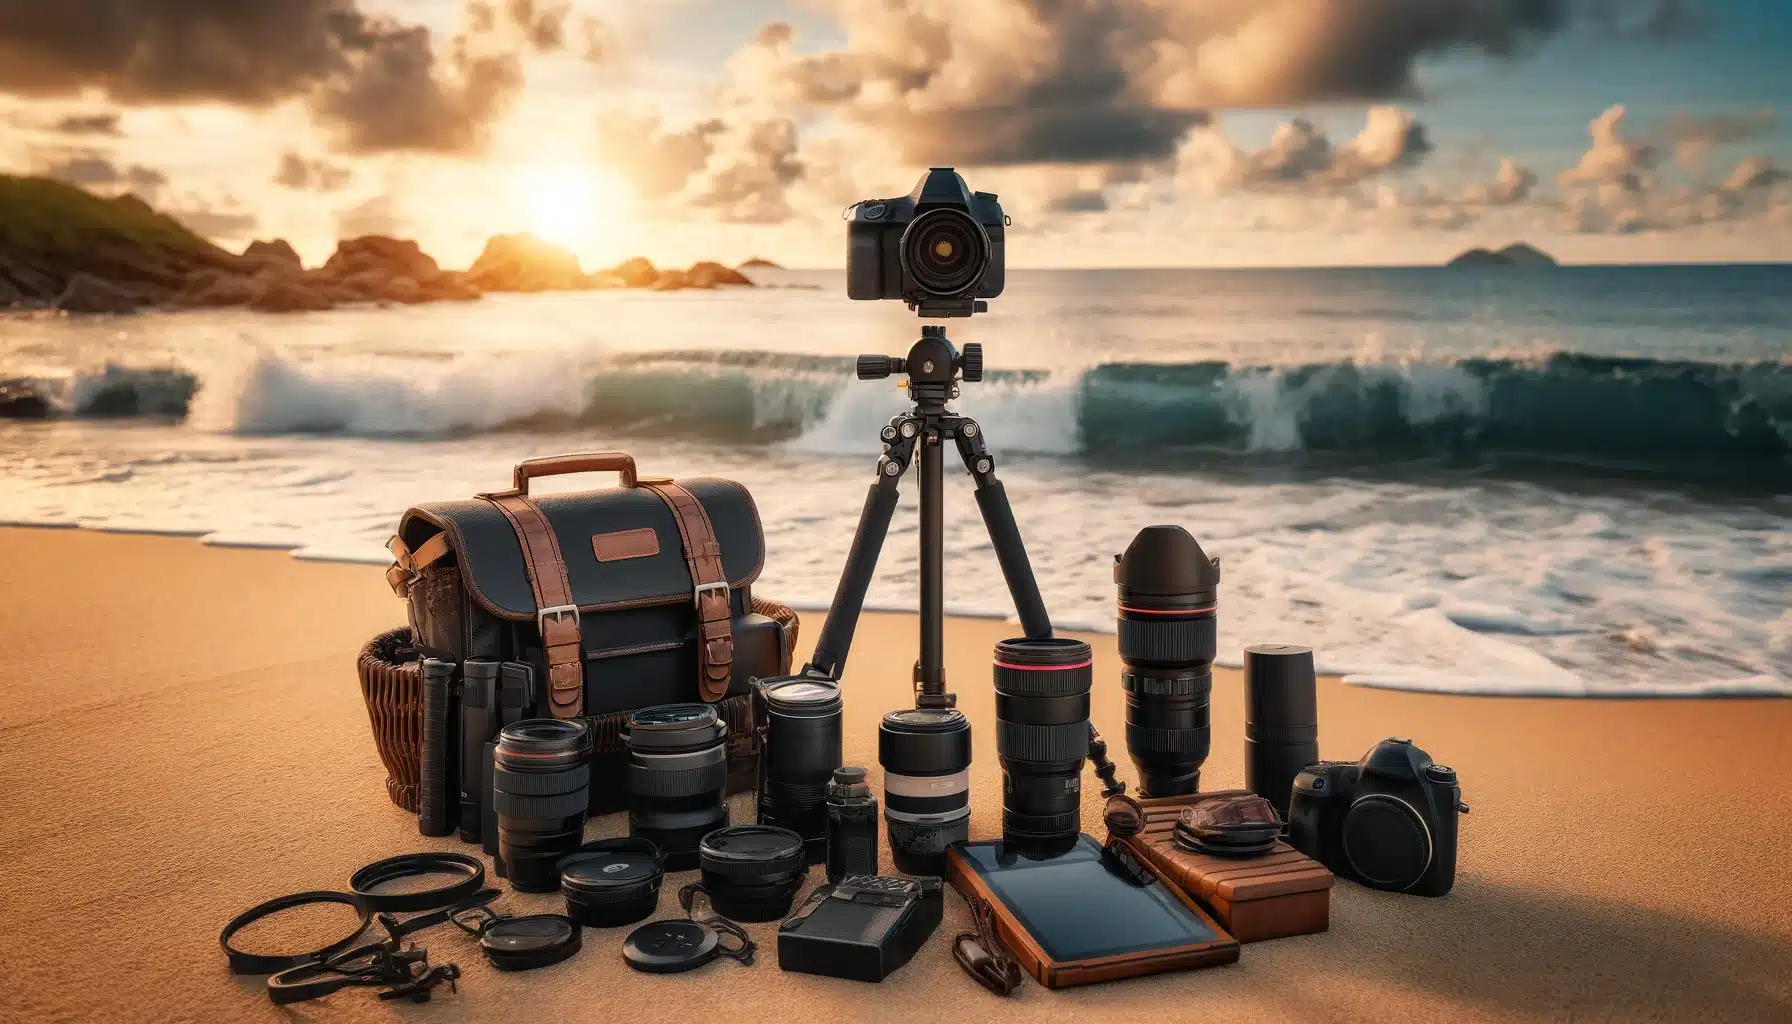 A well-organized seascape photography setup on a rocky beach at sunrise, featuring a camera on a tripod, various lenses, and other essential gear.